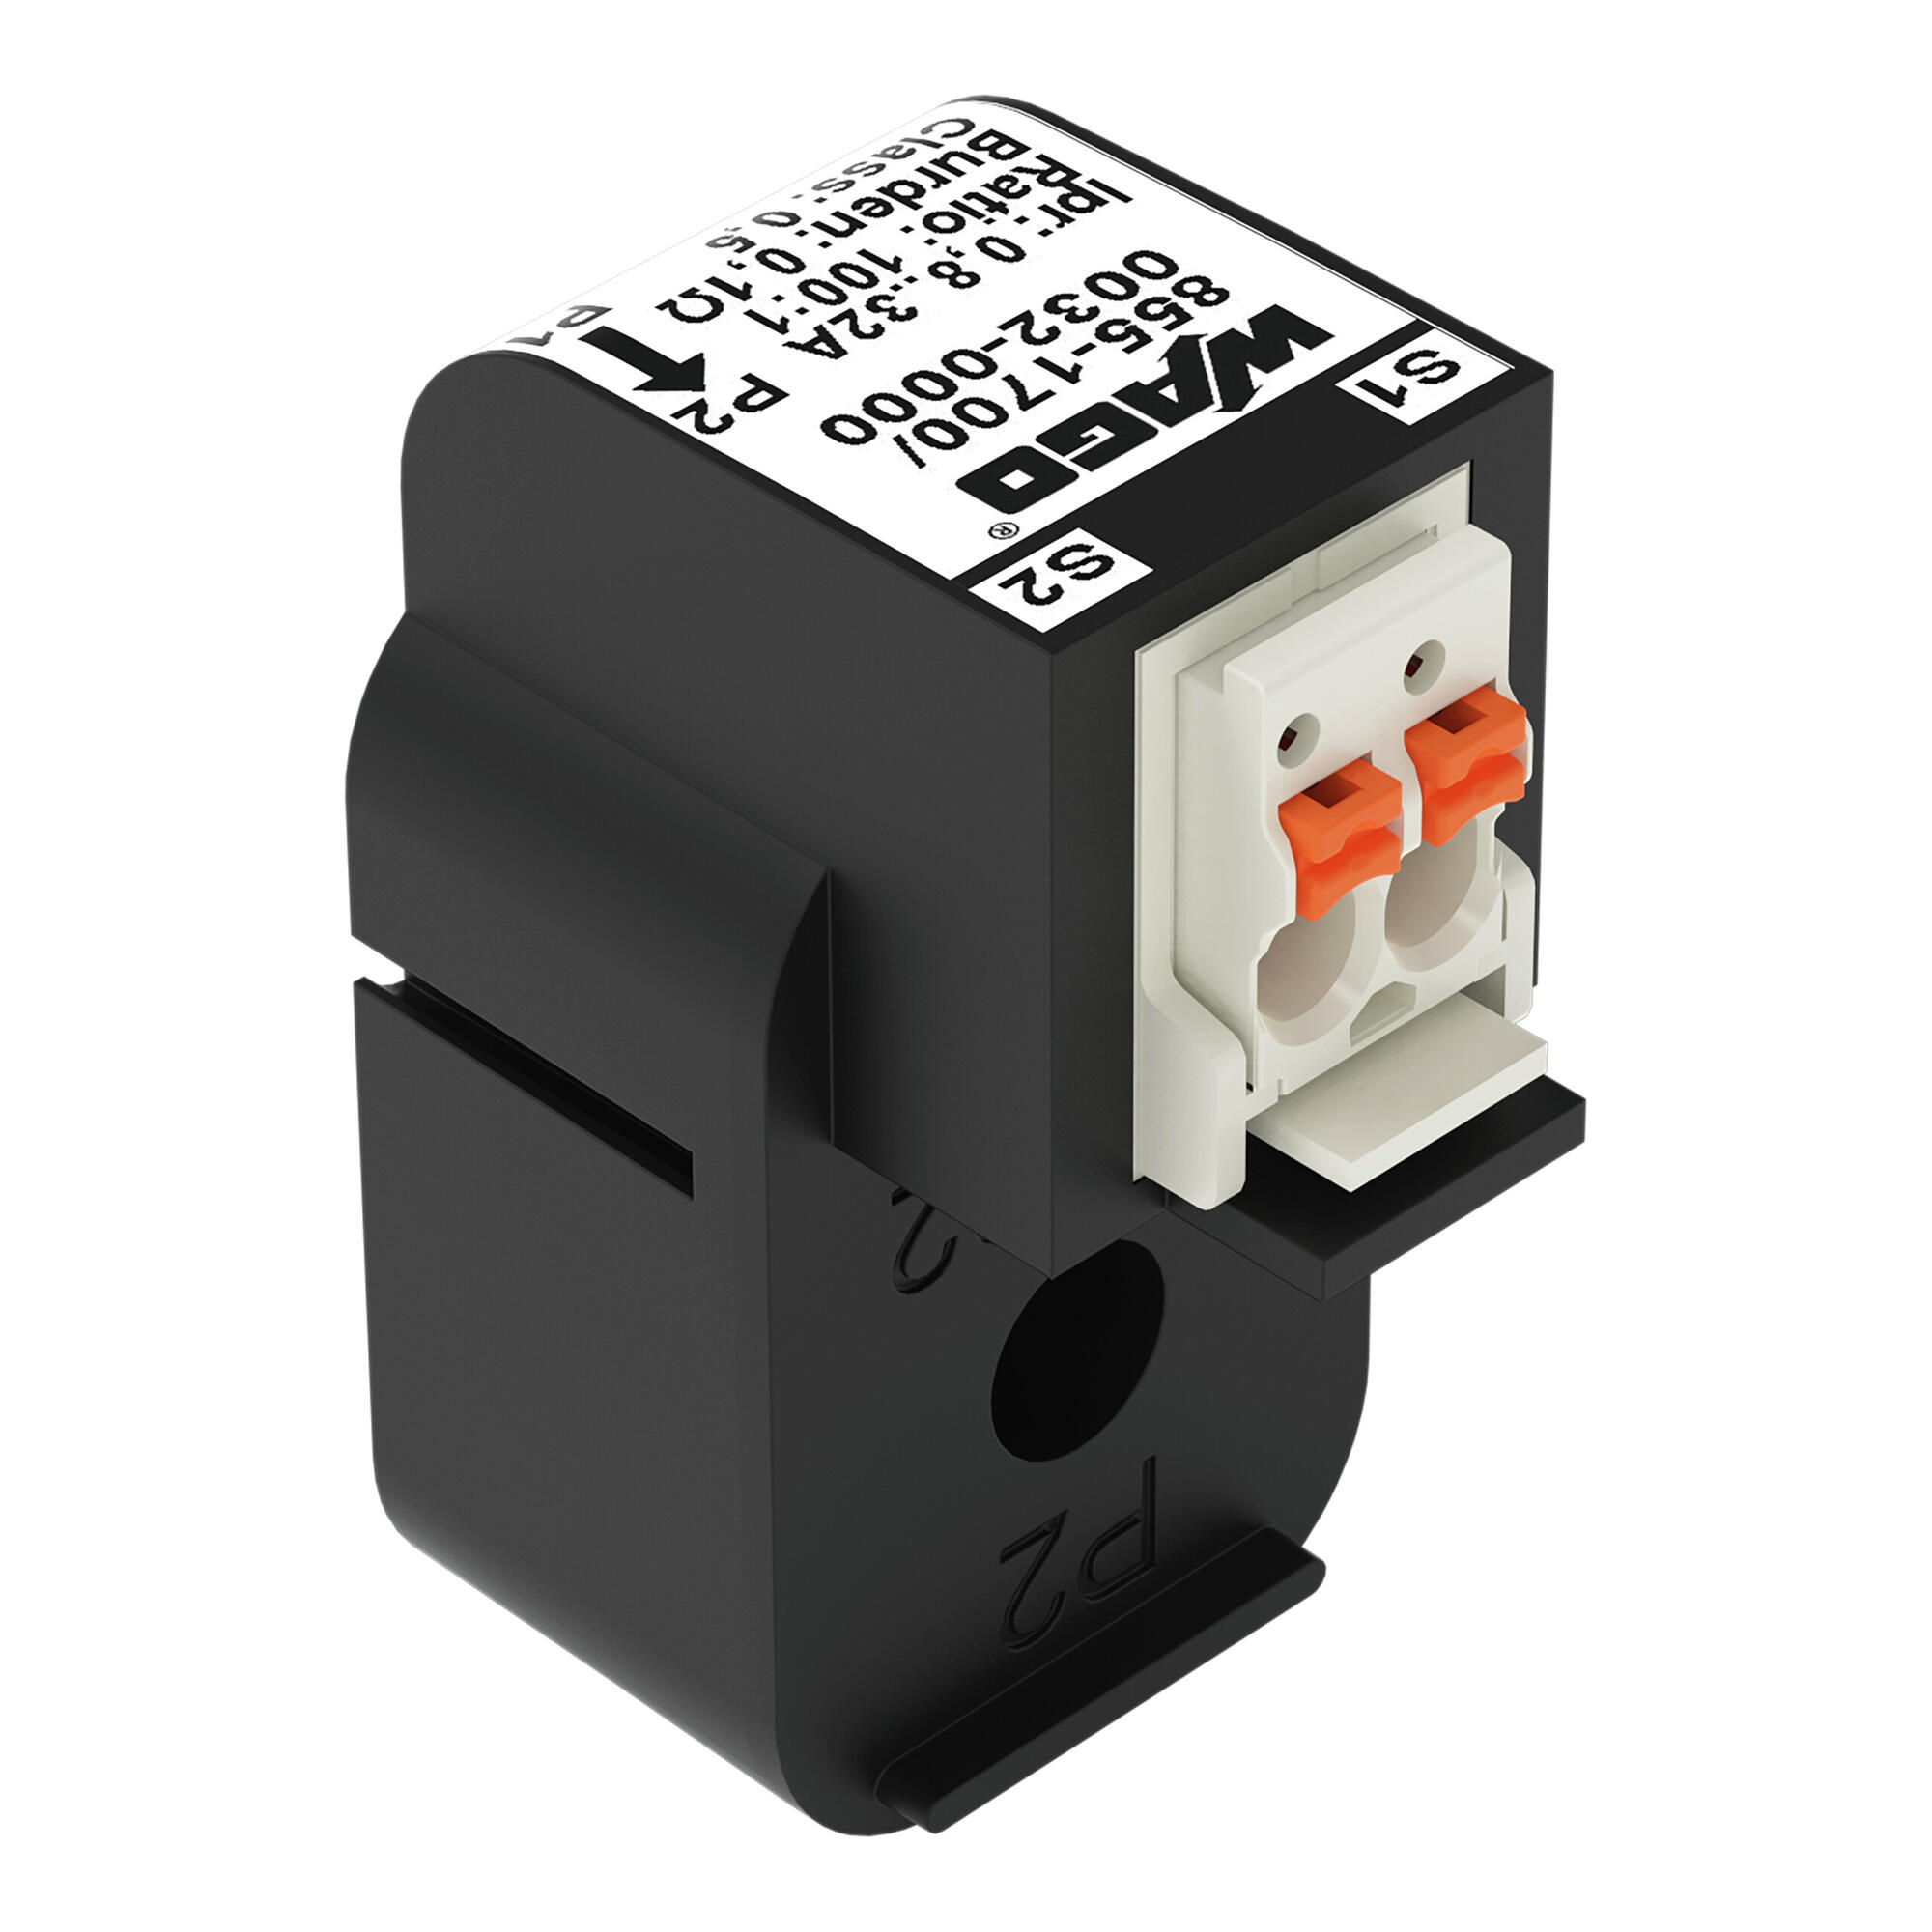 Plug-in current transformer; Primary rated current 32 A; Secondary rated current 320 mA